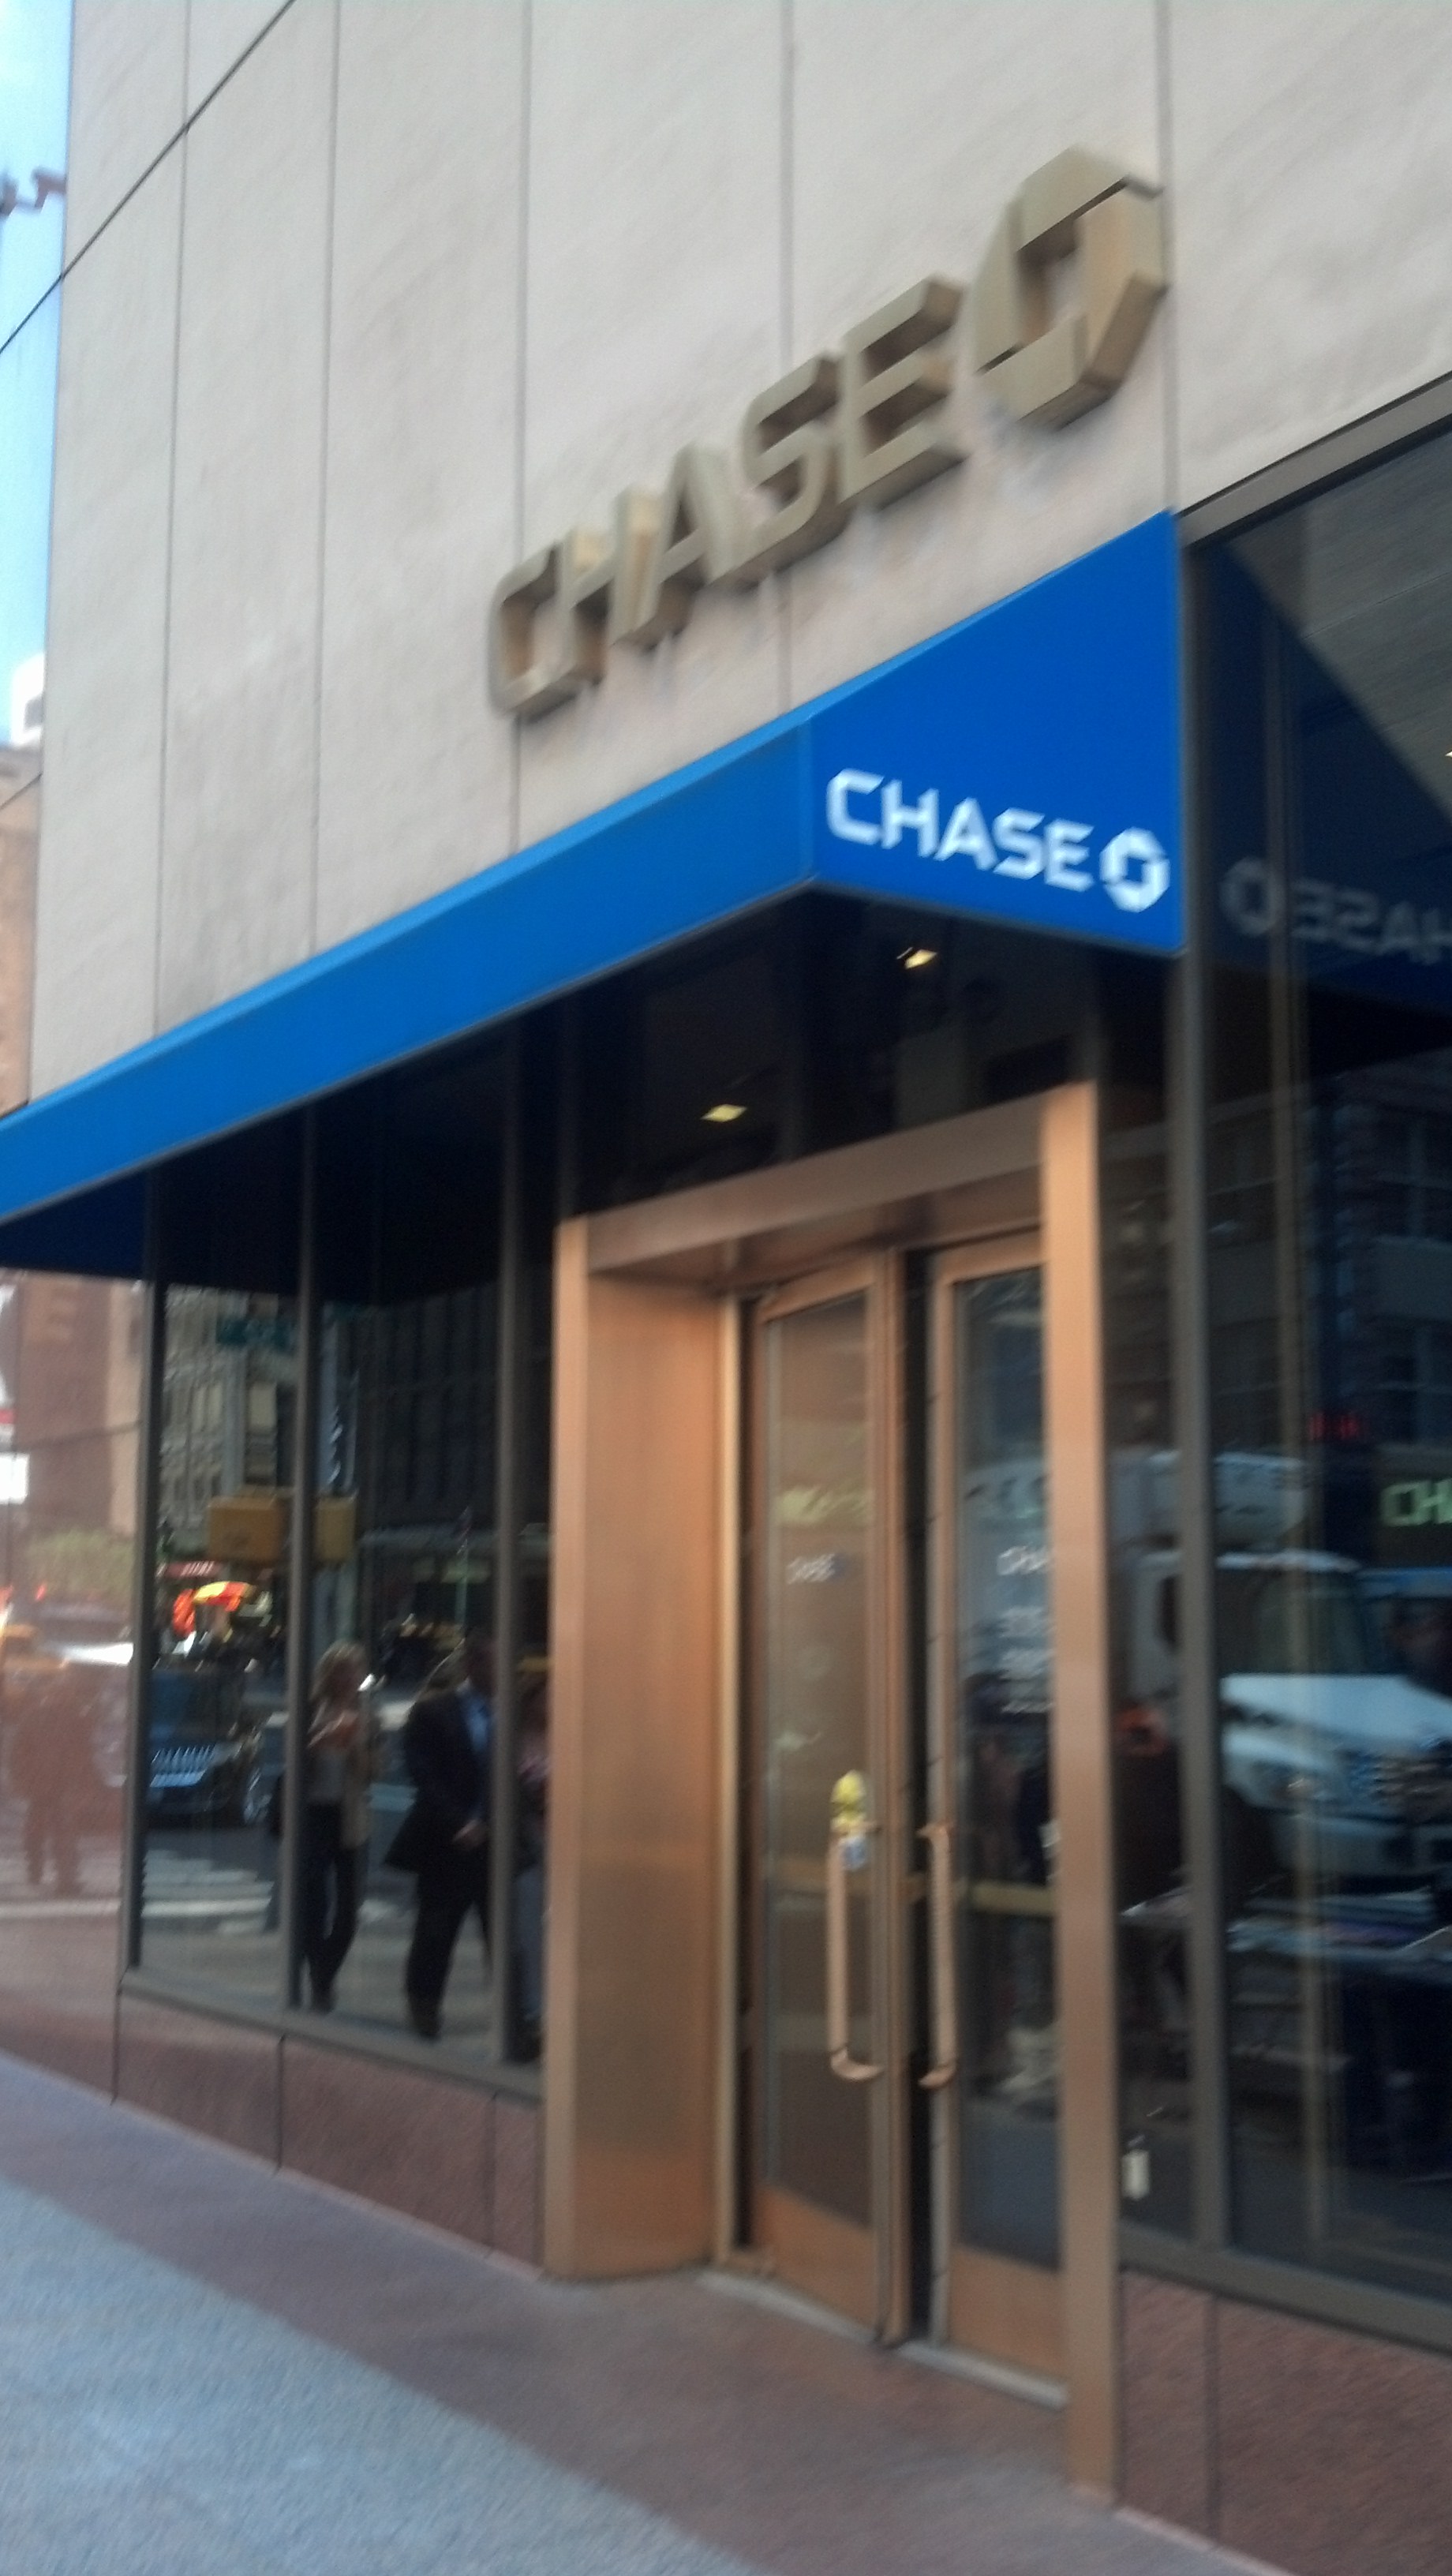 Offers at the Local Chase Bank Branch: Chase Sapphire Preferred, United Explorer